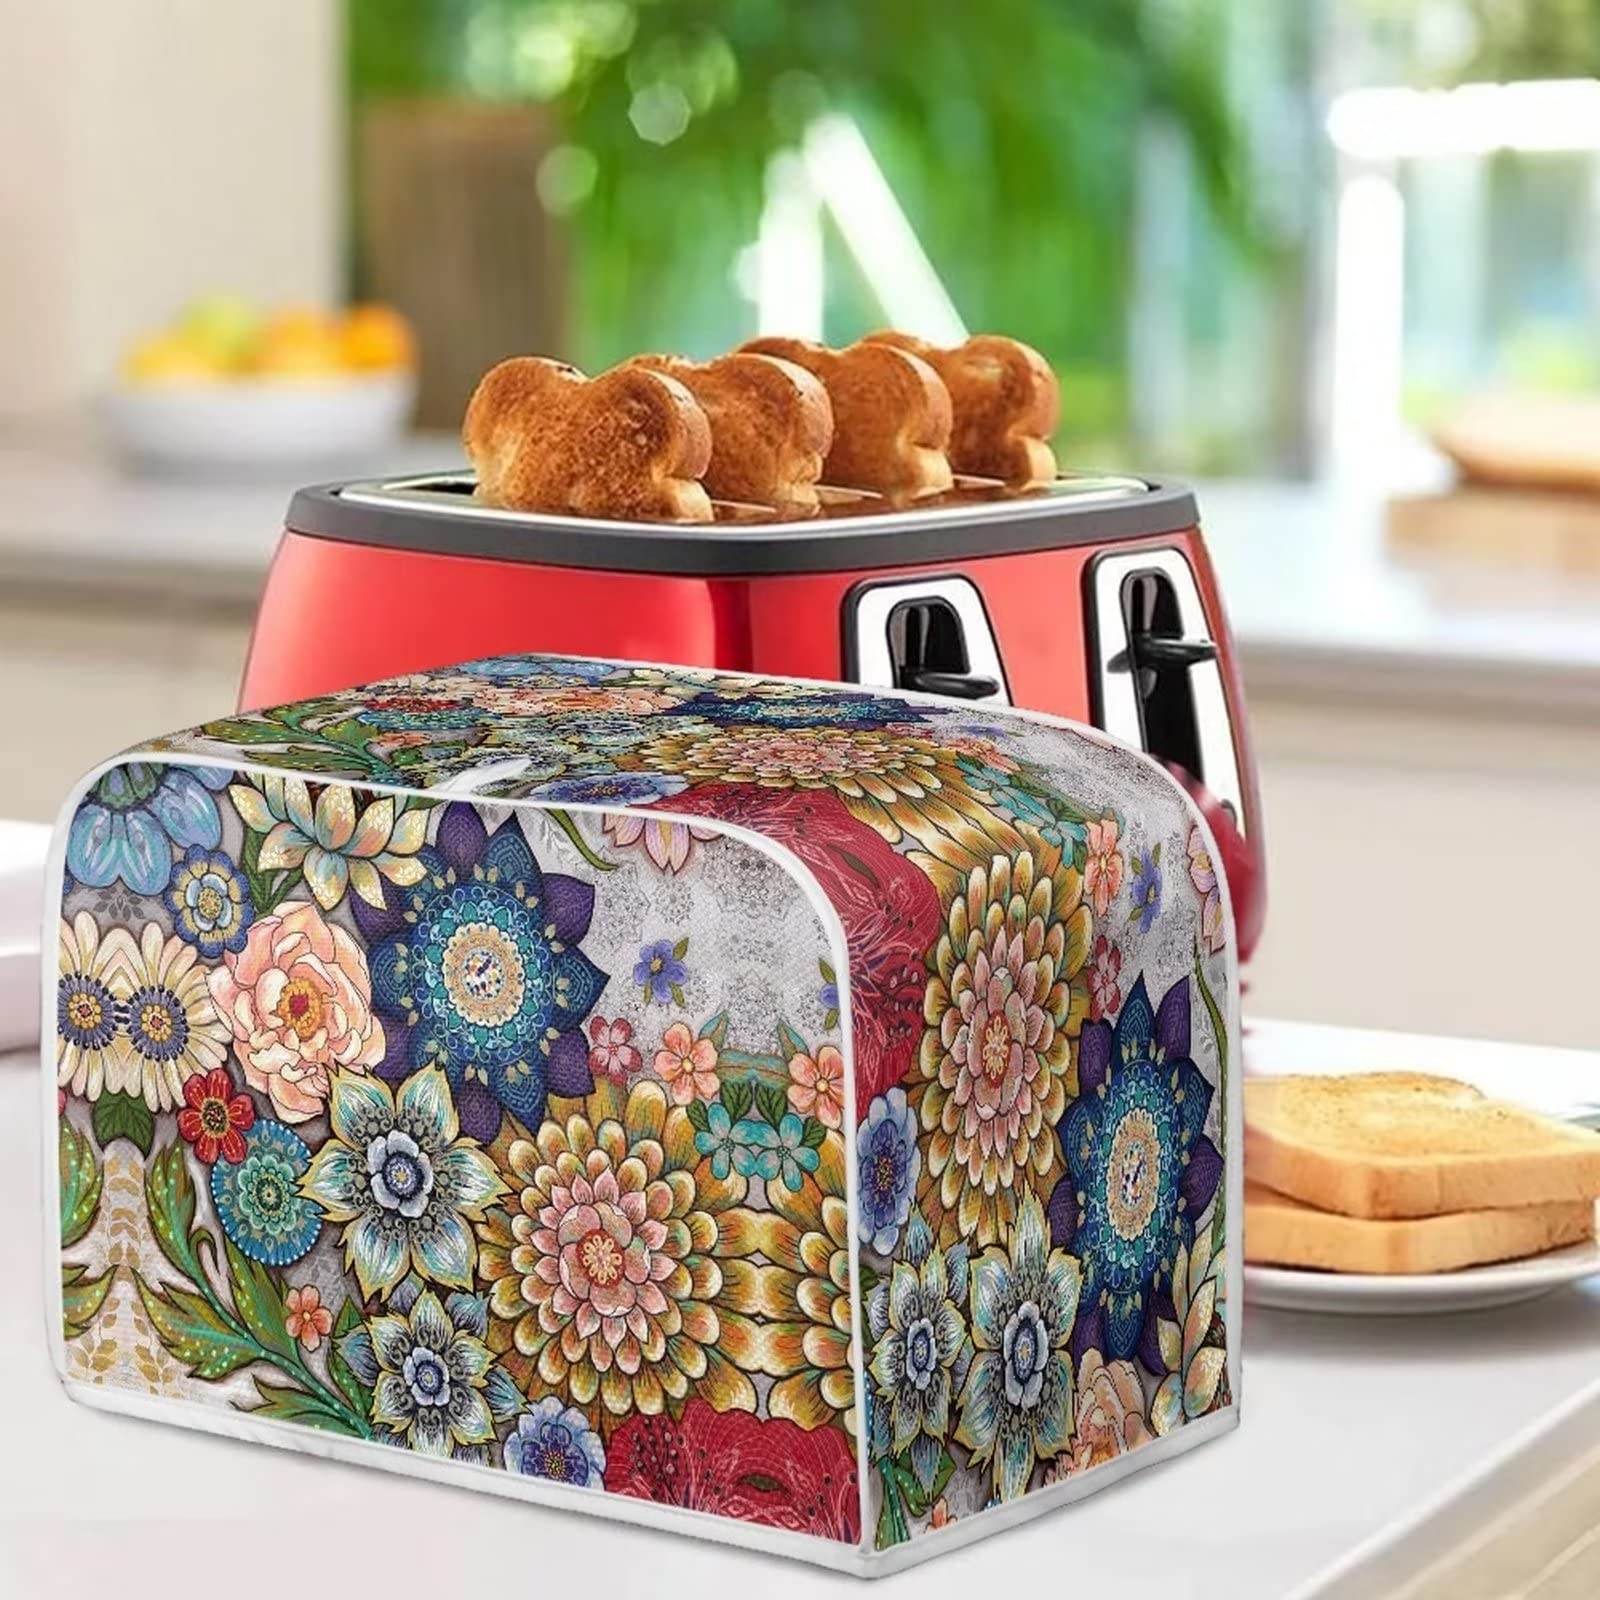 Gomyblomy Vintage Mandalas 4 Slice Toaster Cover Dustproof Cover Small Appliance Cover Bread Maker Cover Dust Protection & Waterproof